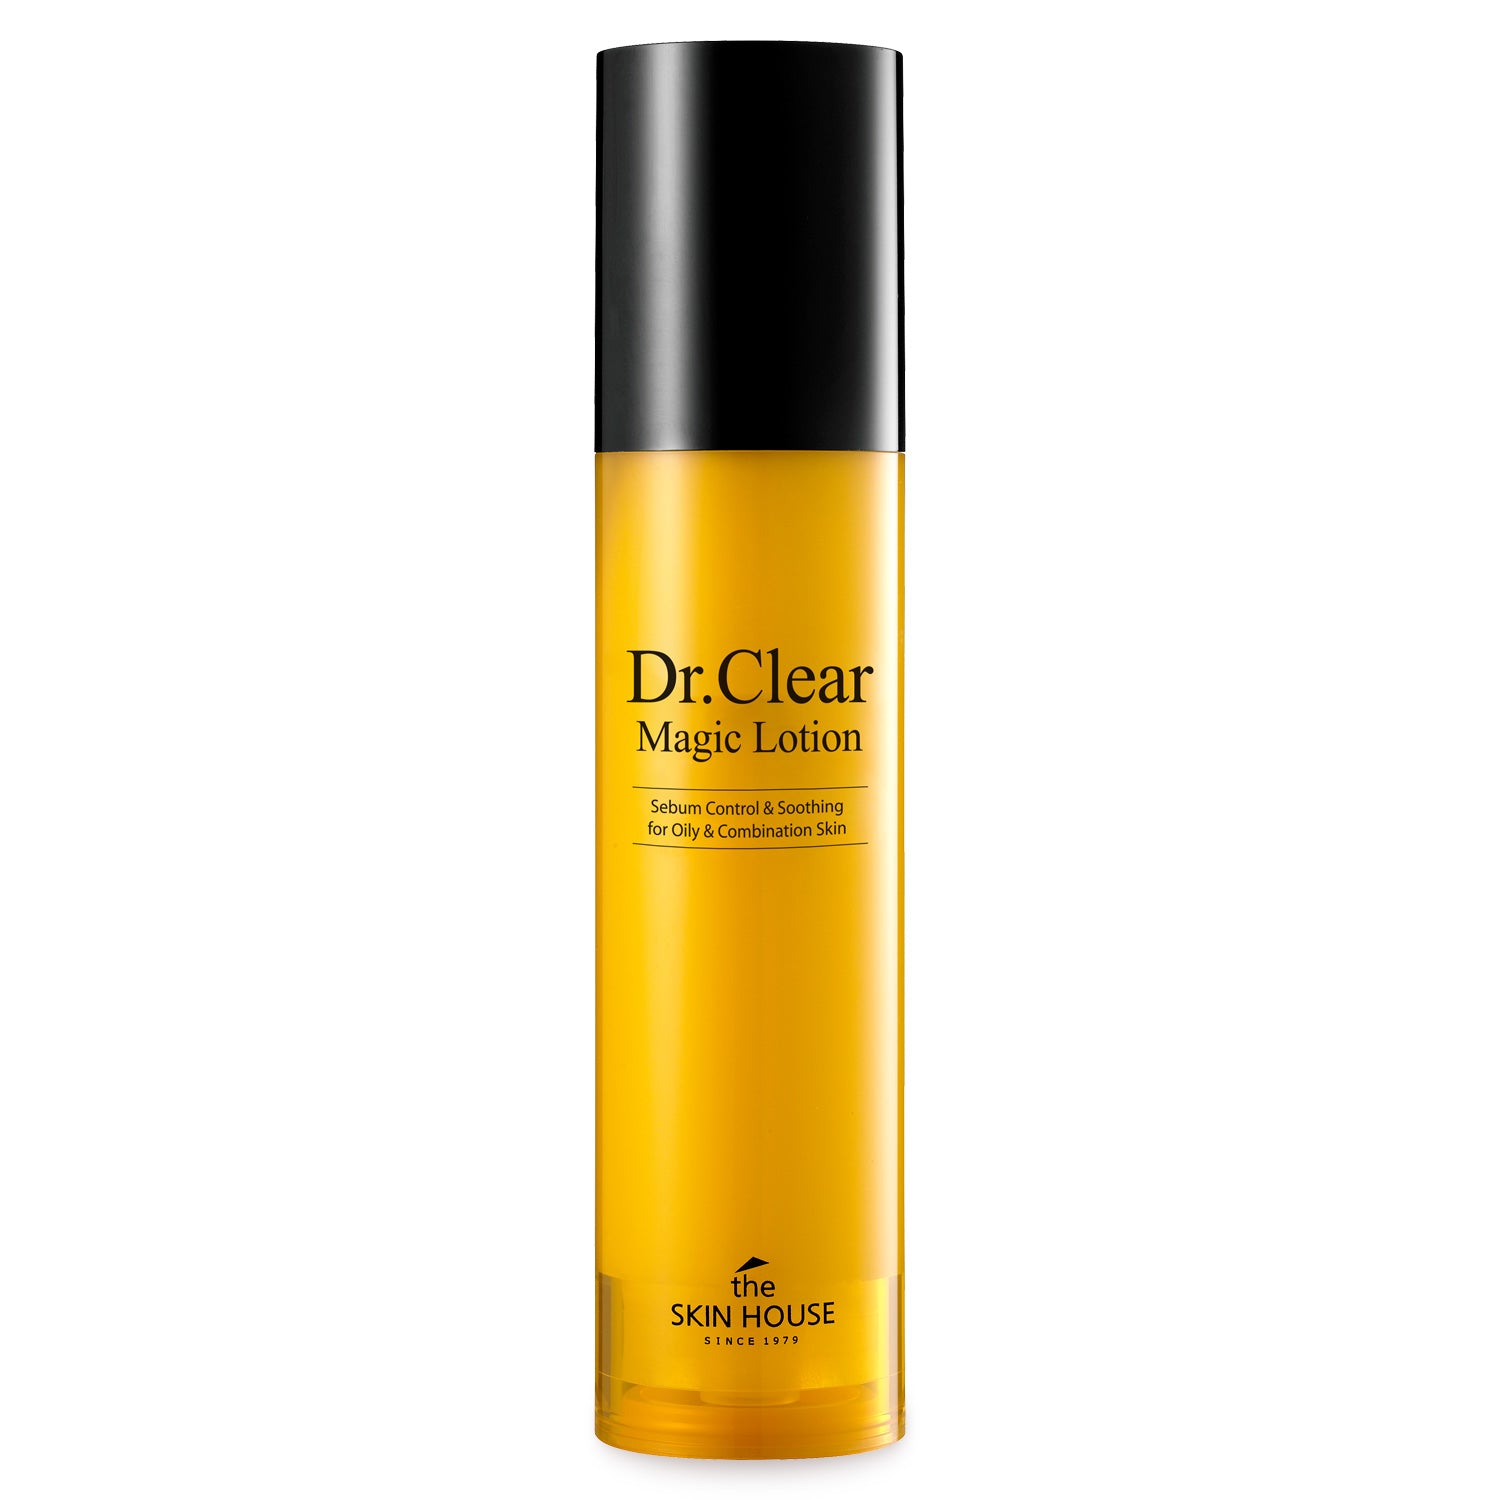 Dr. Clear Magic Lotion